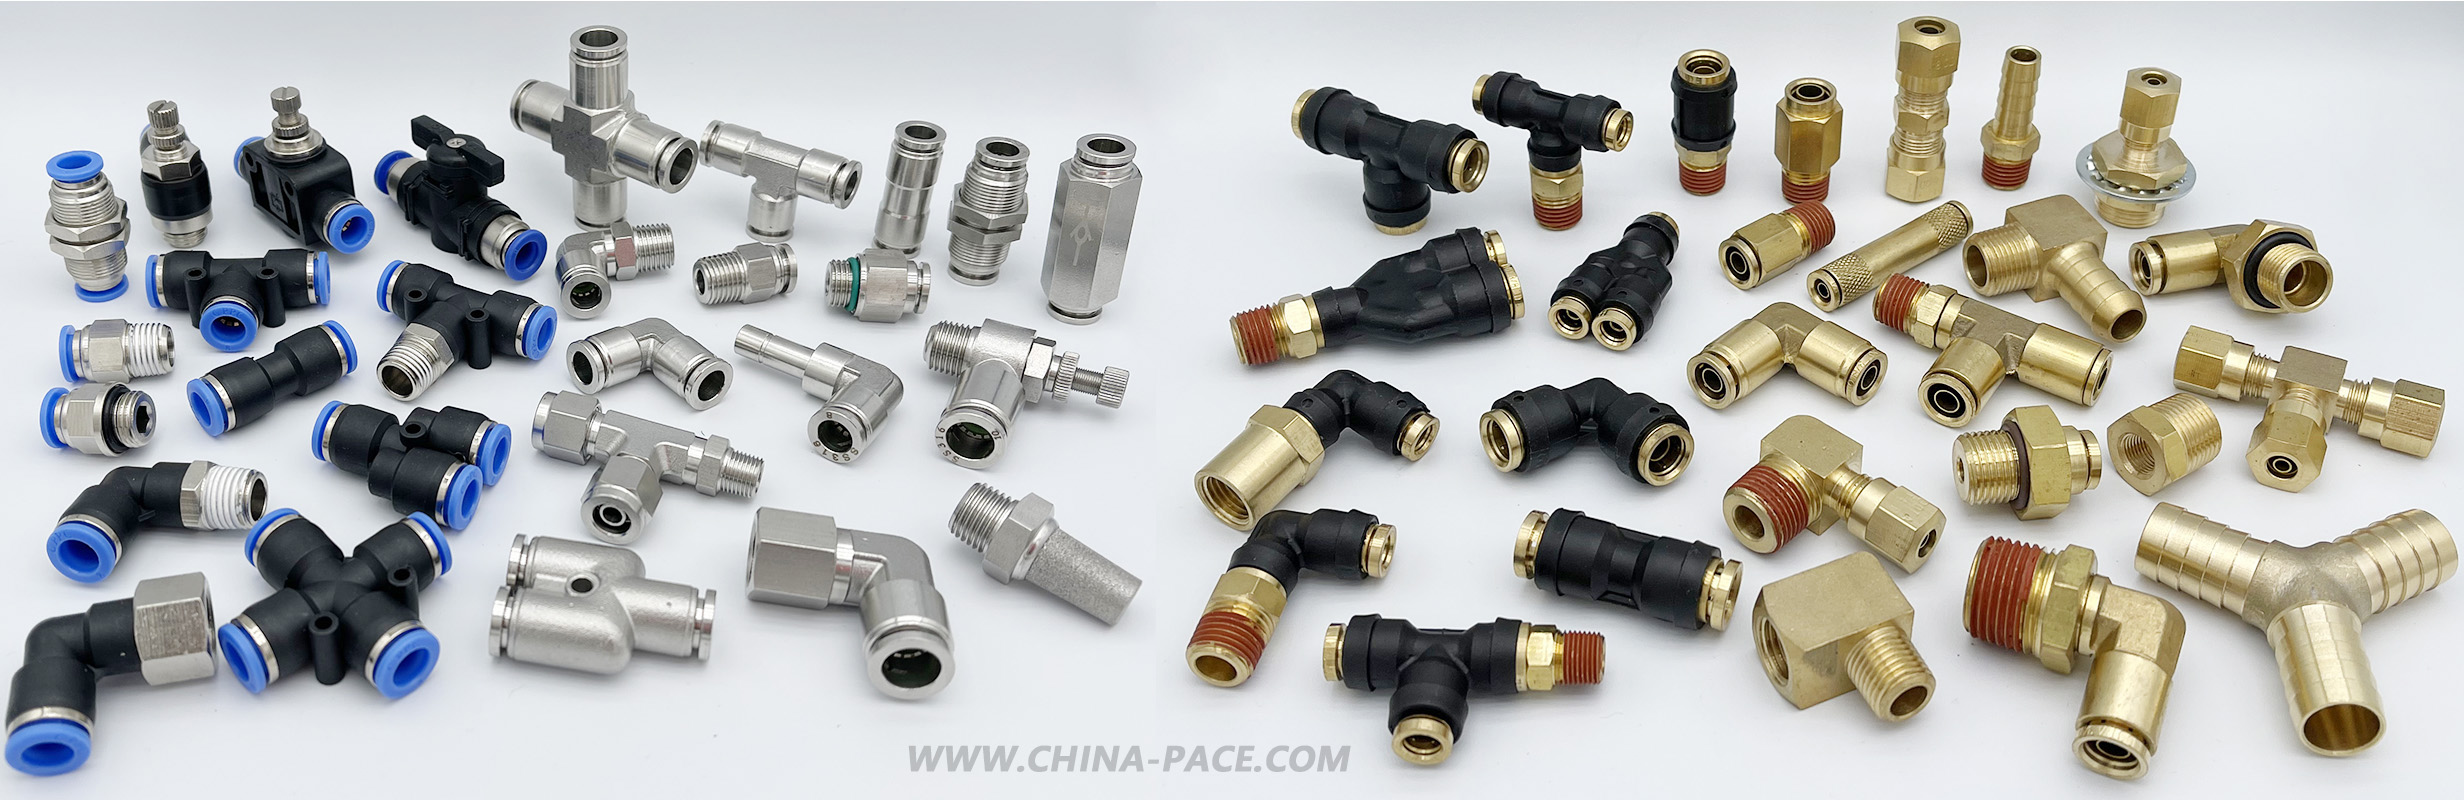 Pneumatic fittings, push in fittings, push to connect fittings, air fittings, push in air fittings